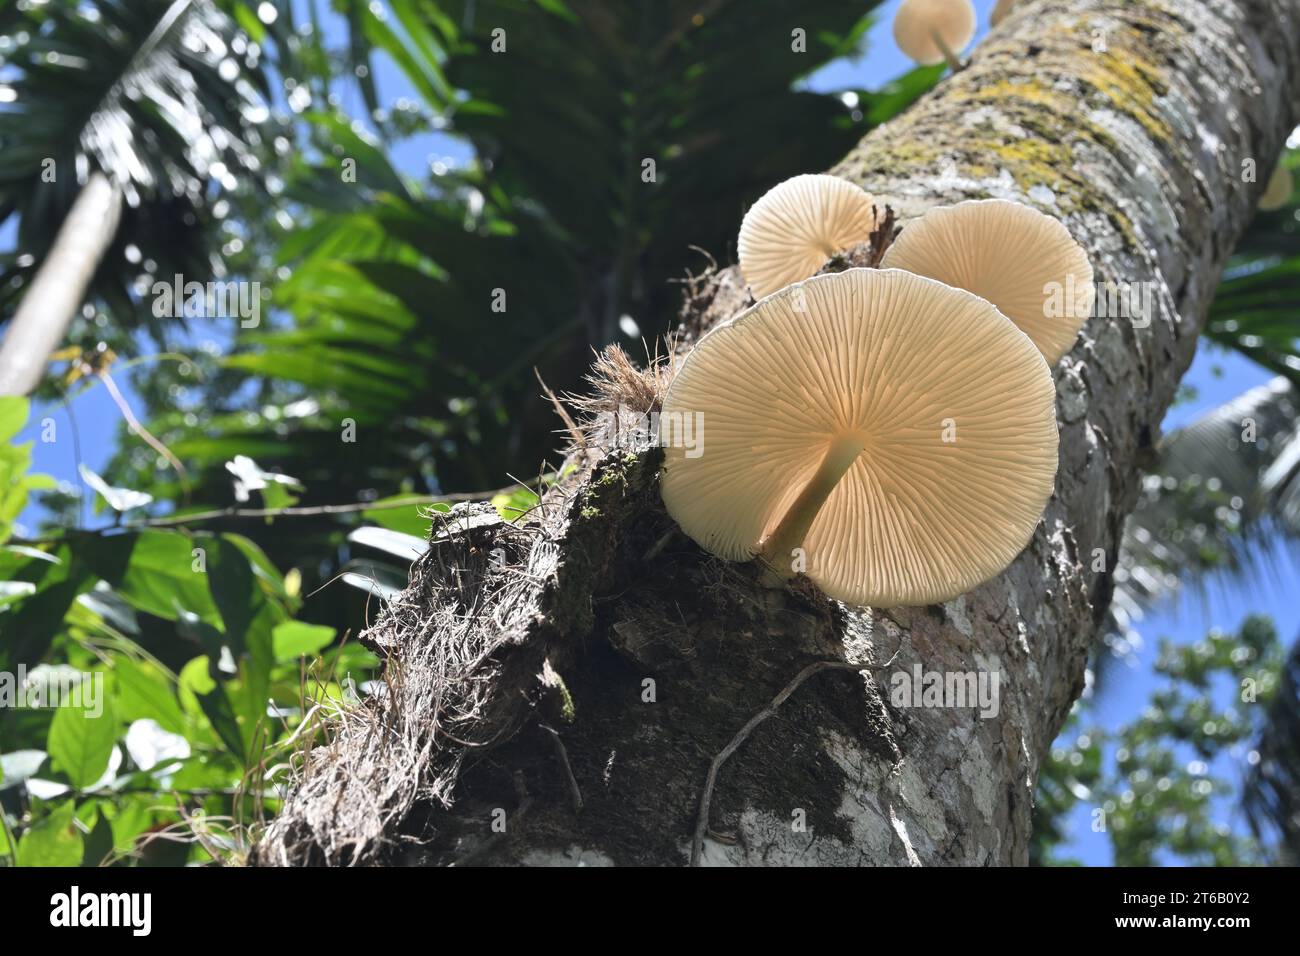 Underside view of a Oudemansiella genus large white cap mushroom blooming on the surface of a dead coconut stem Stock Photo